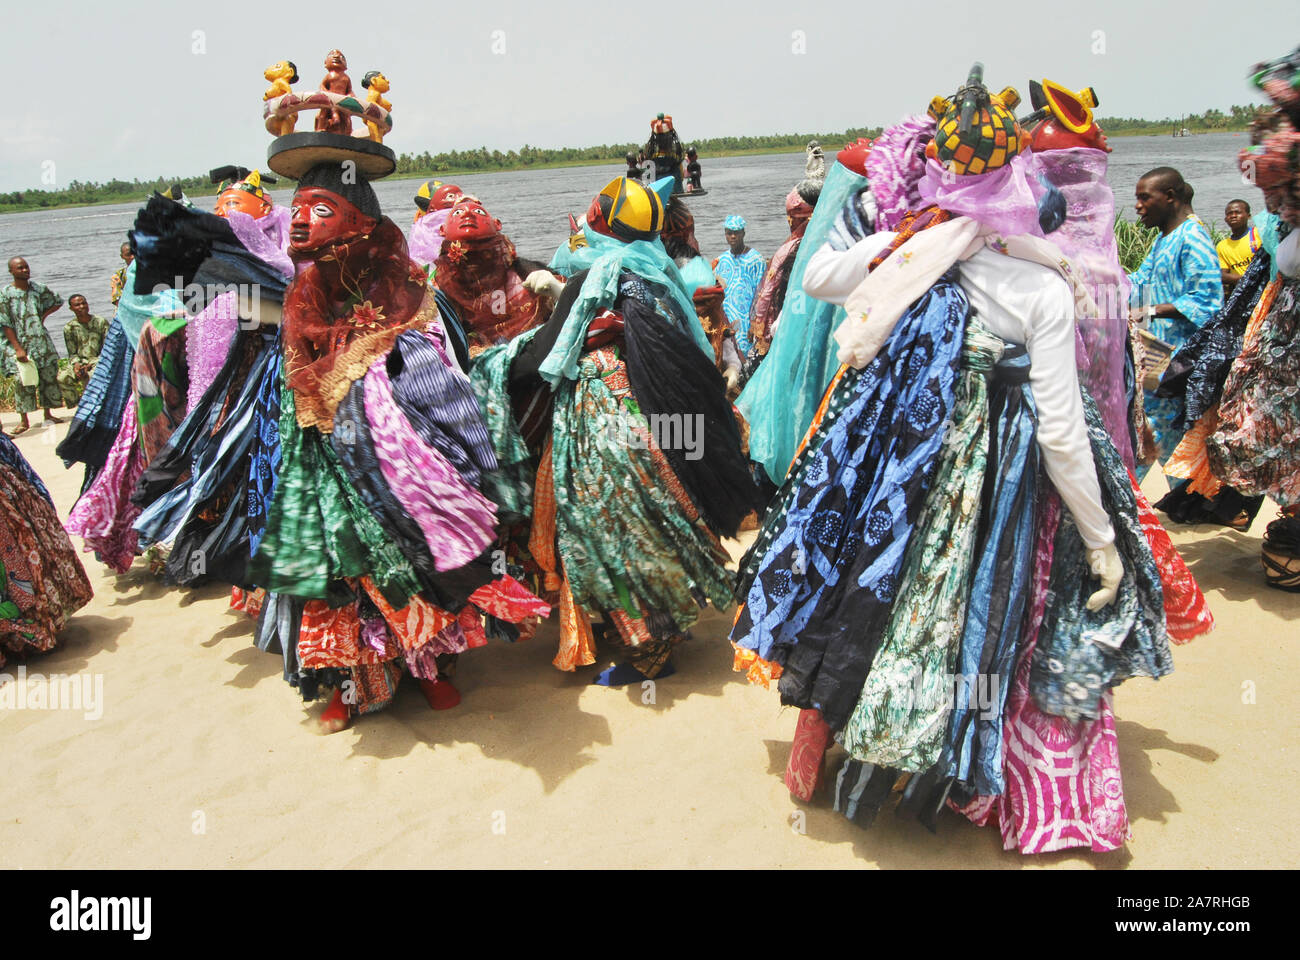 Men in Gelede Masks dancing to the beat of the spirit during the annual Lagos Black Heritage festival at the historical Slave Trade of Badagry Beach, Lagos Nigeria. Gelede Masquerades are being celebrated in South West Nigeria for ritual purposes and entertainment. Stock Photo